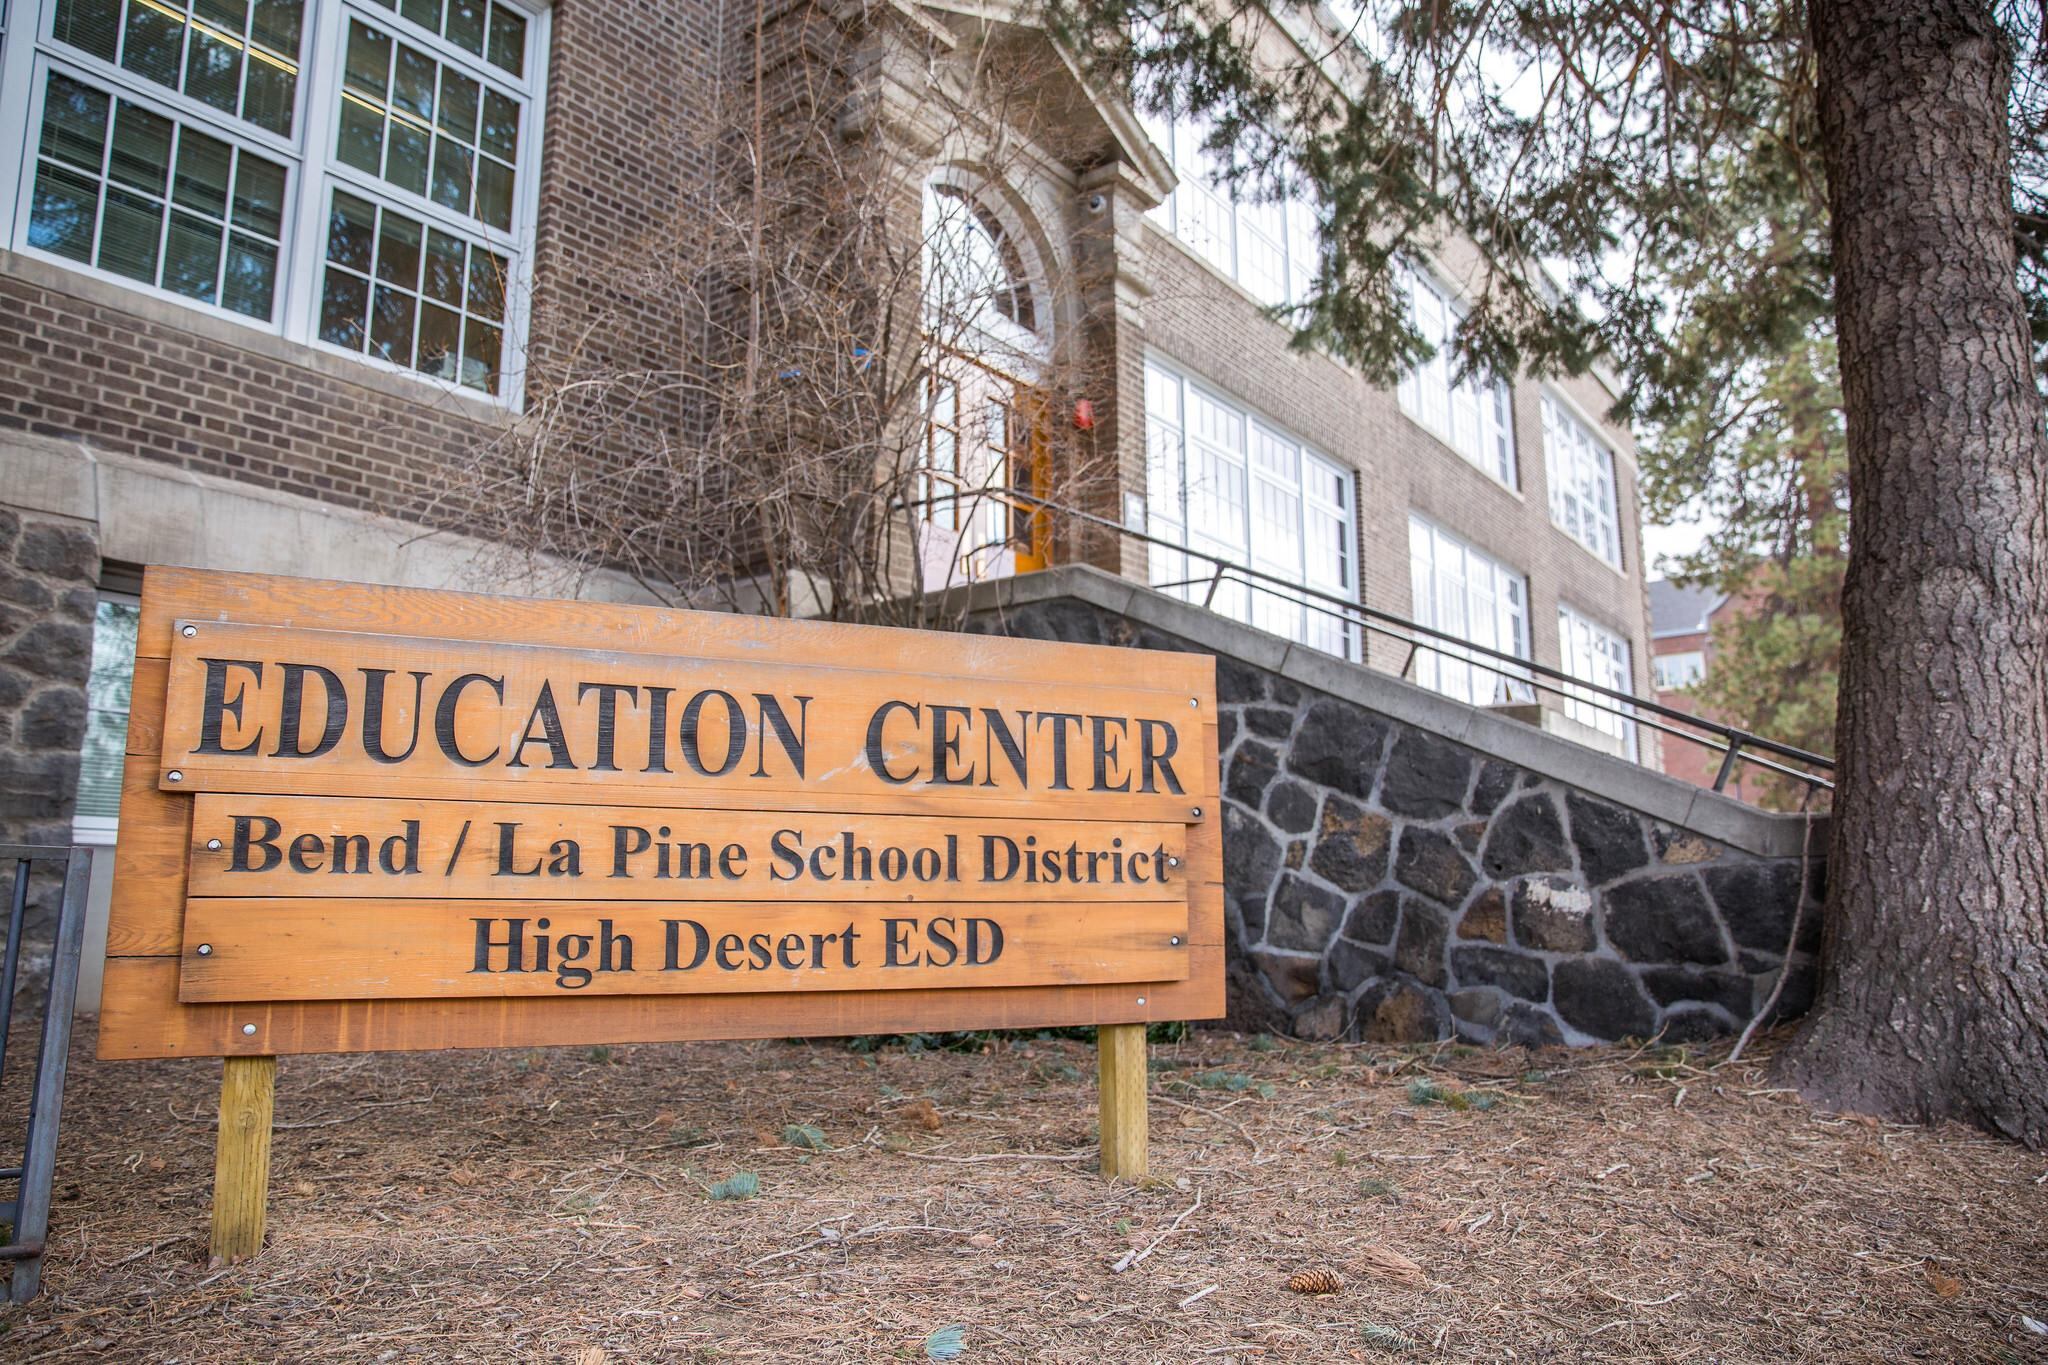 The Bend-La Pine School District is expected to grow by 3,000 students in the next 10 years.